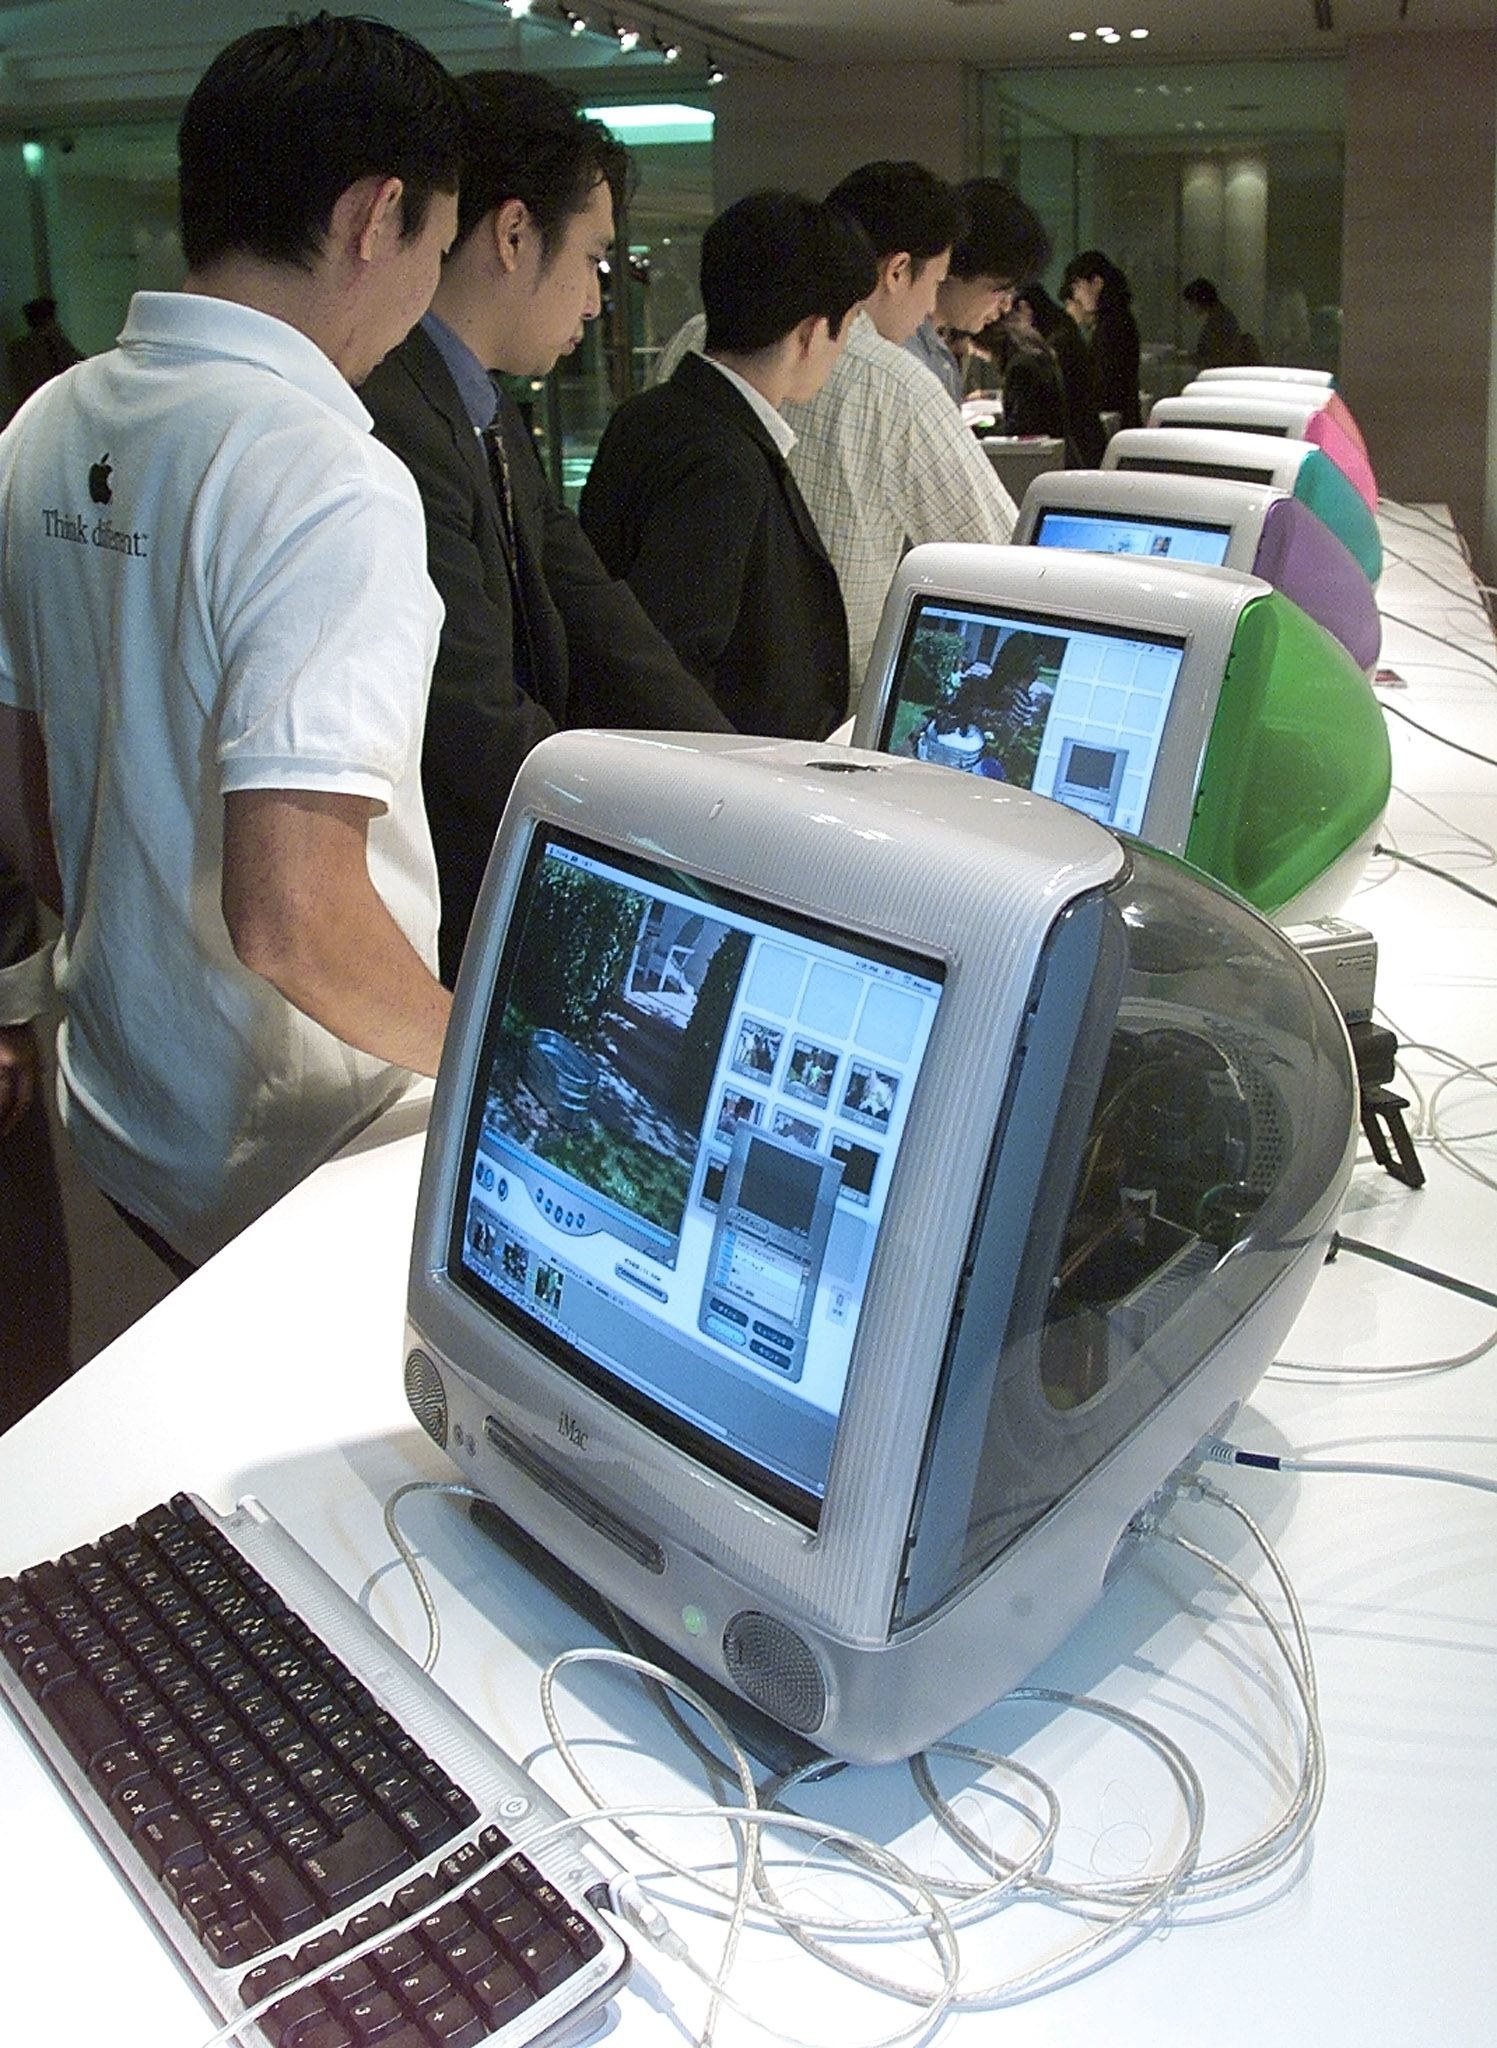 People look at the new MacIntosh computers in Japan in 1999